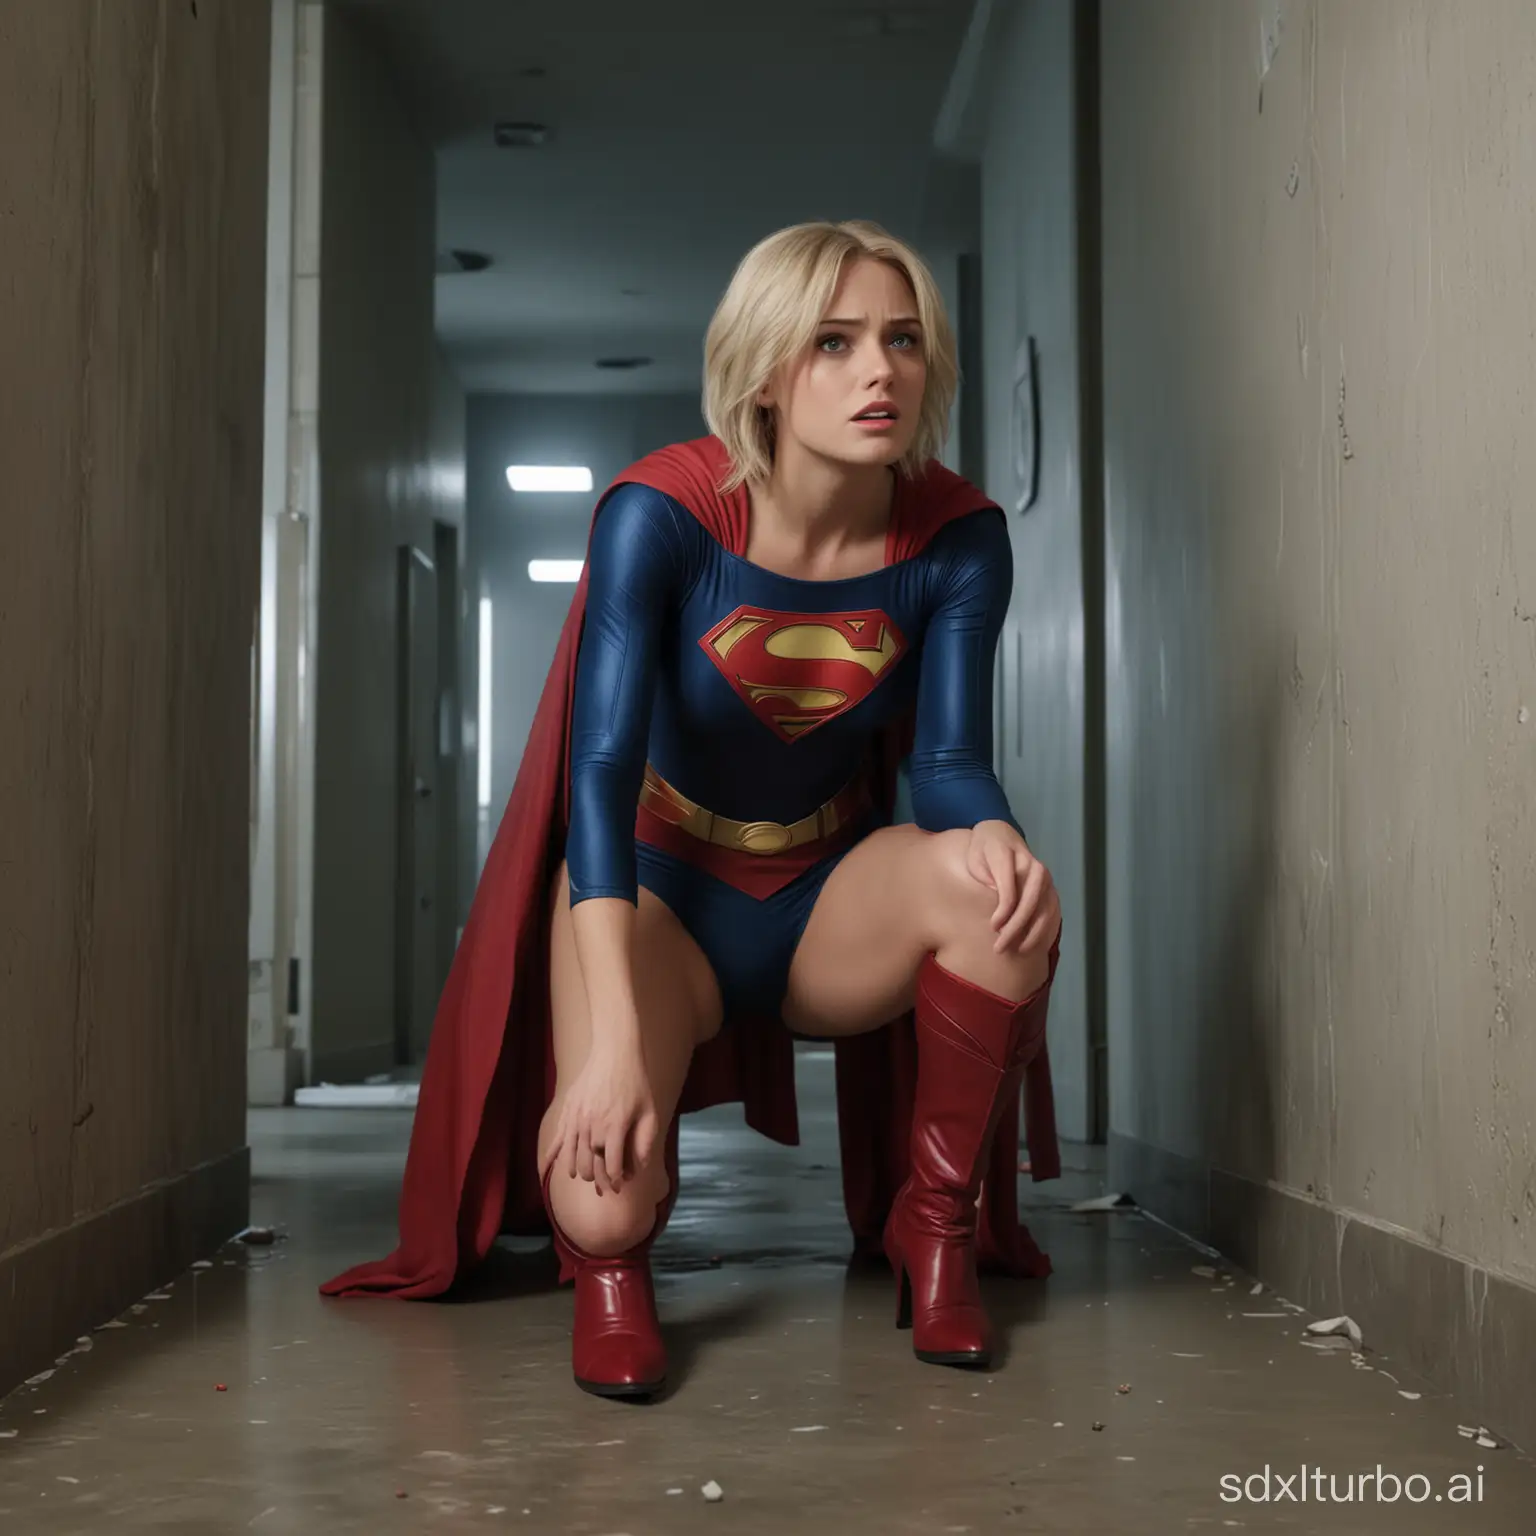 Supergirl dressed as Superman, perfect face, androgynous, perfect teeth, very short blond hair, lean, wide eyed, very confused, gasping, in shock, trapped in a room with no exit, legs and boots stiletto, 4k resolution, realistic,